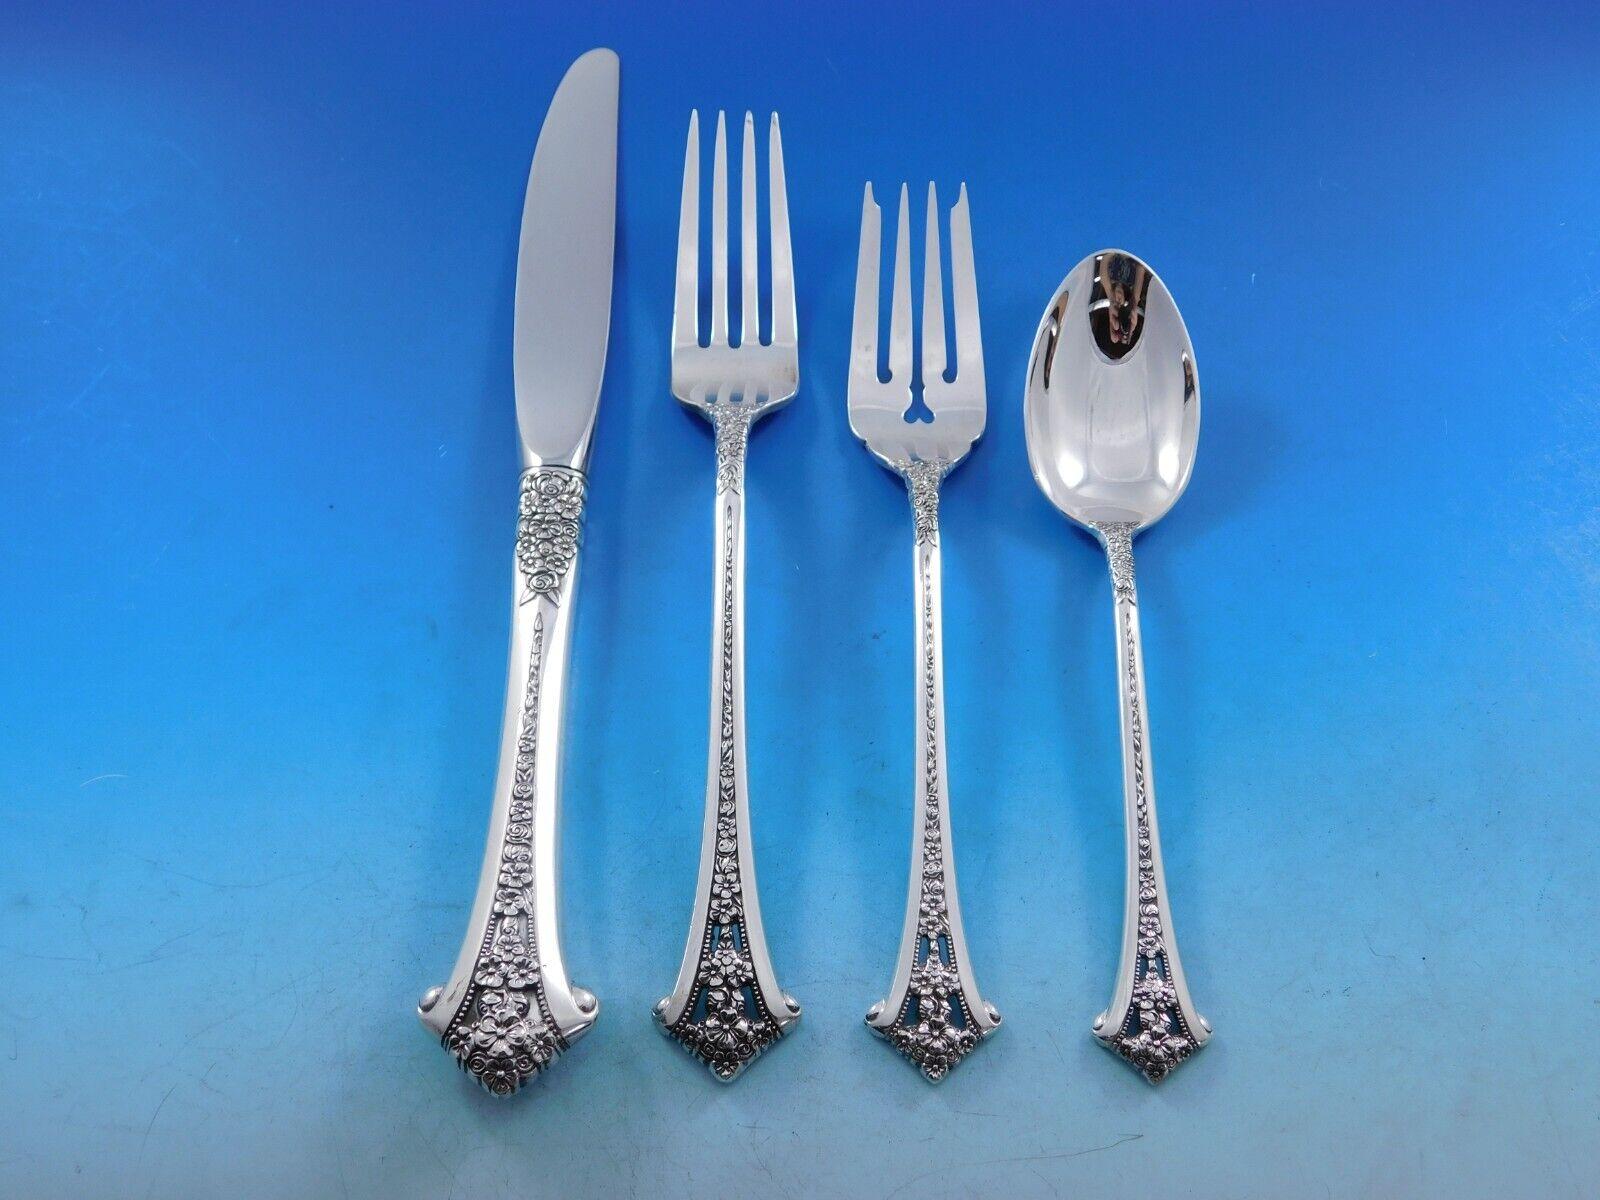 Classic Bouquet by Gorham sterling silver Flatware set, 65 pieces. The handle design is a bouquet of flowers with pierced and beaded detailing. This set includes:

12 Place Size Knives, 9 1/8